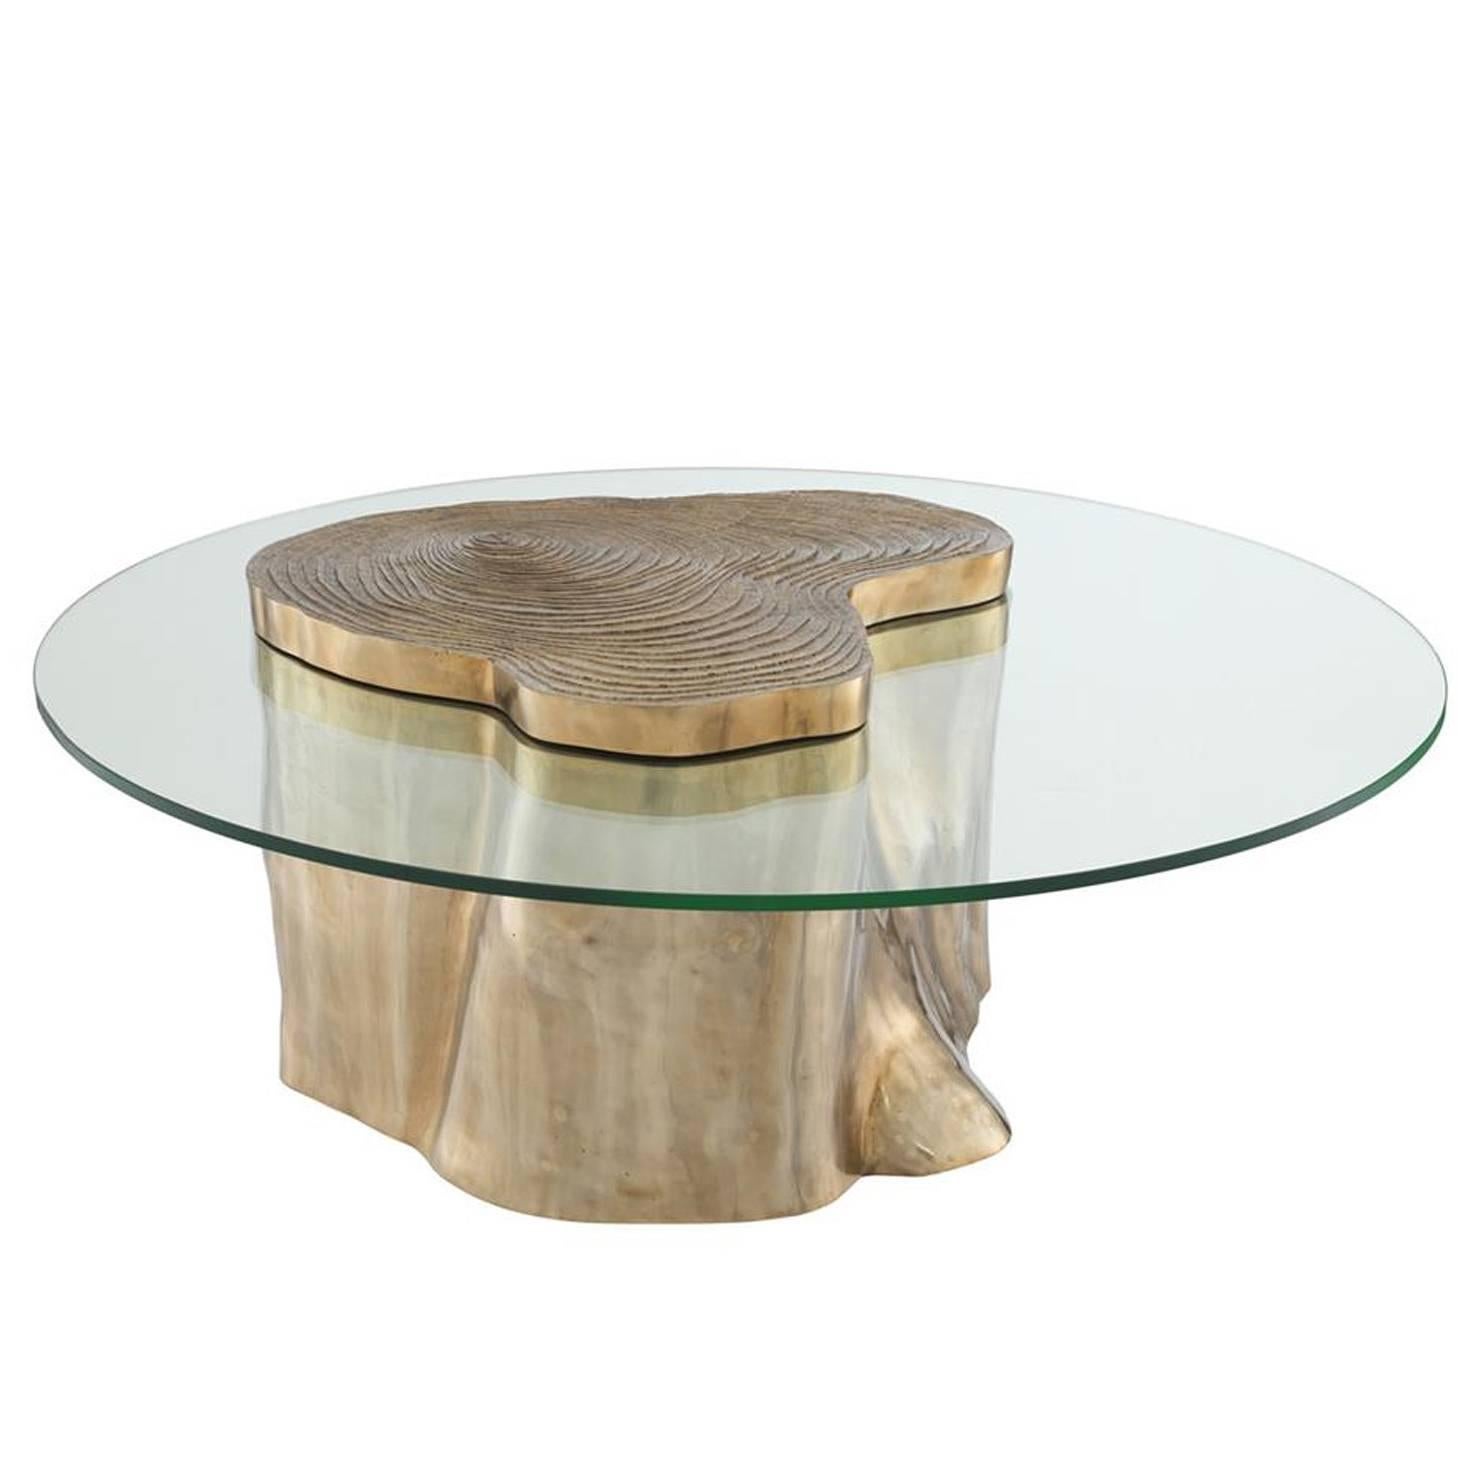 Solid Trunk Coffee Table in Solid Polished Brass Finish